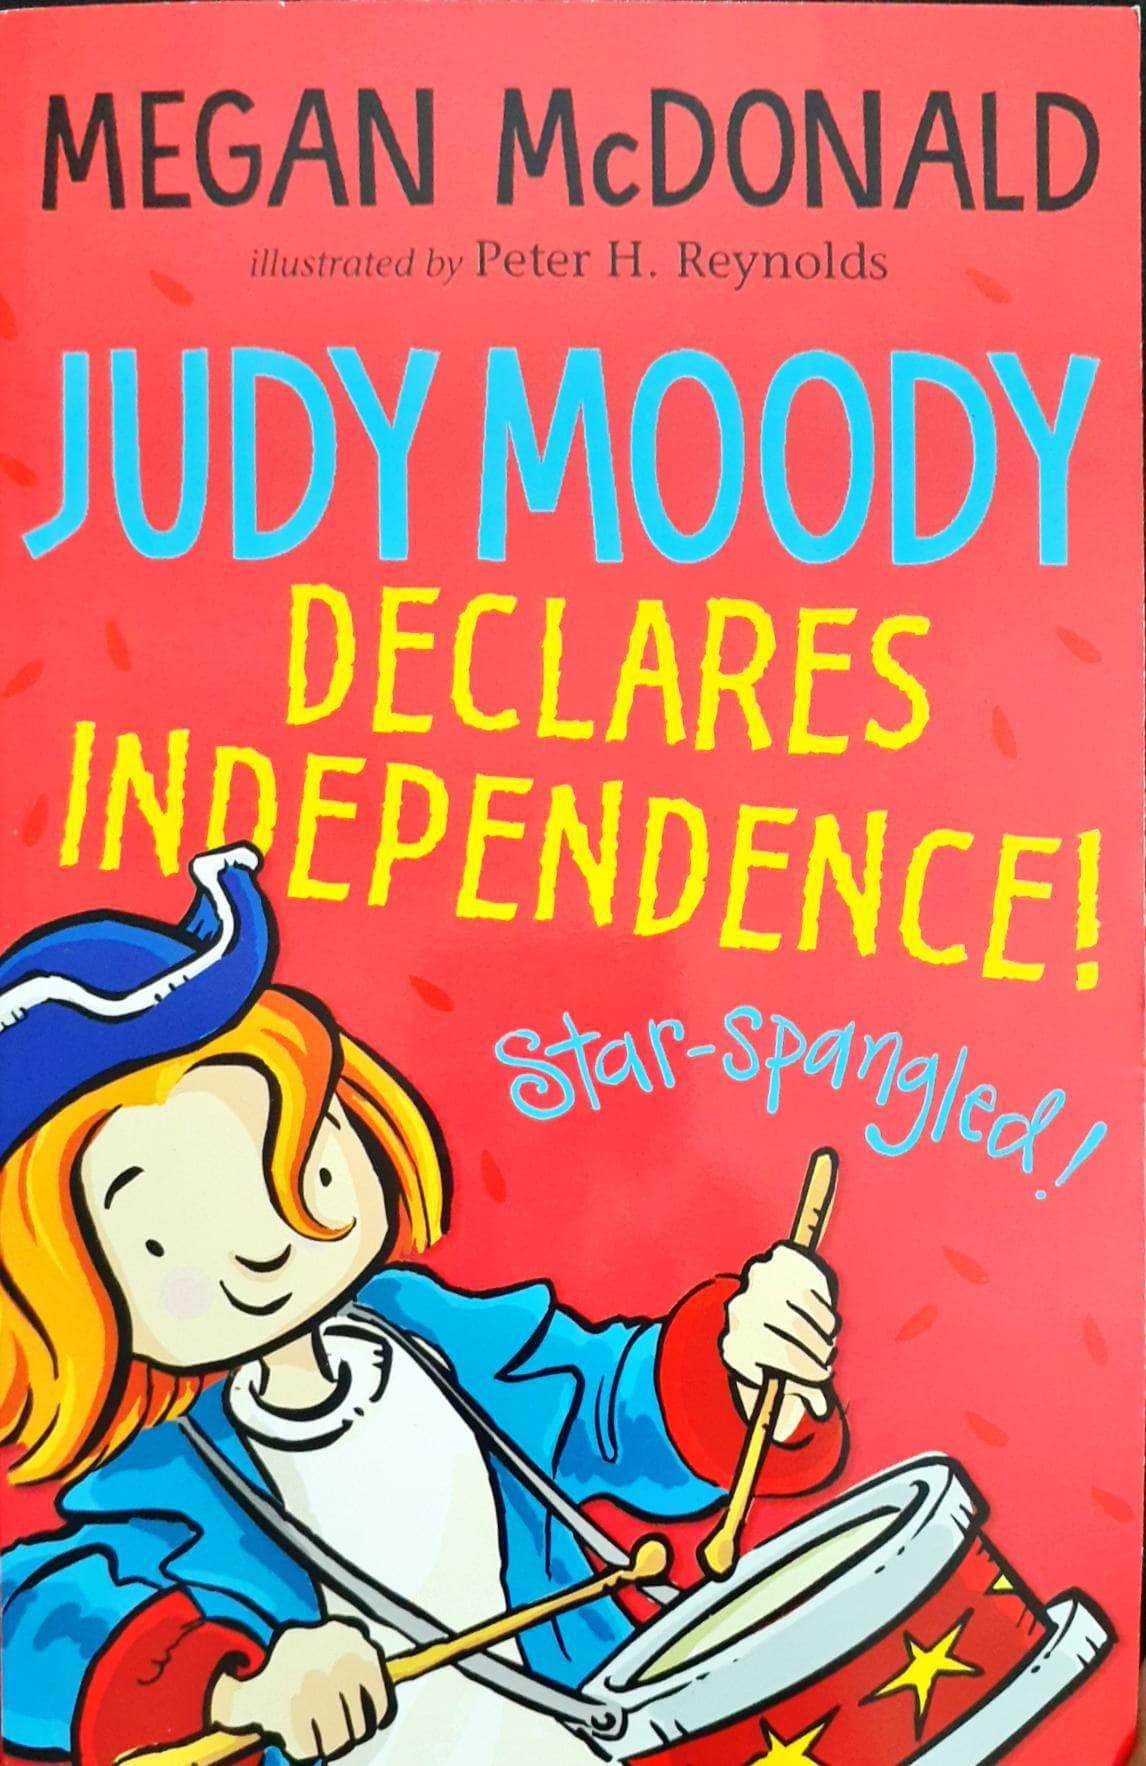 Judy Moody #6 Declares Independence!